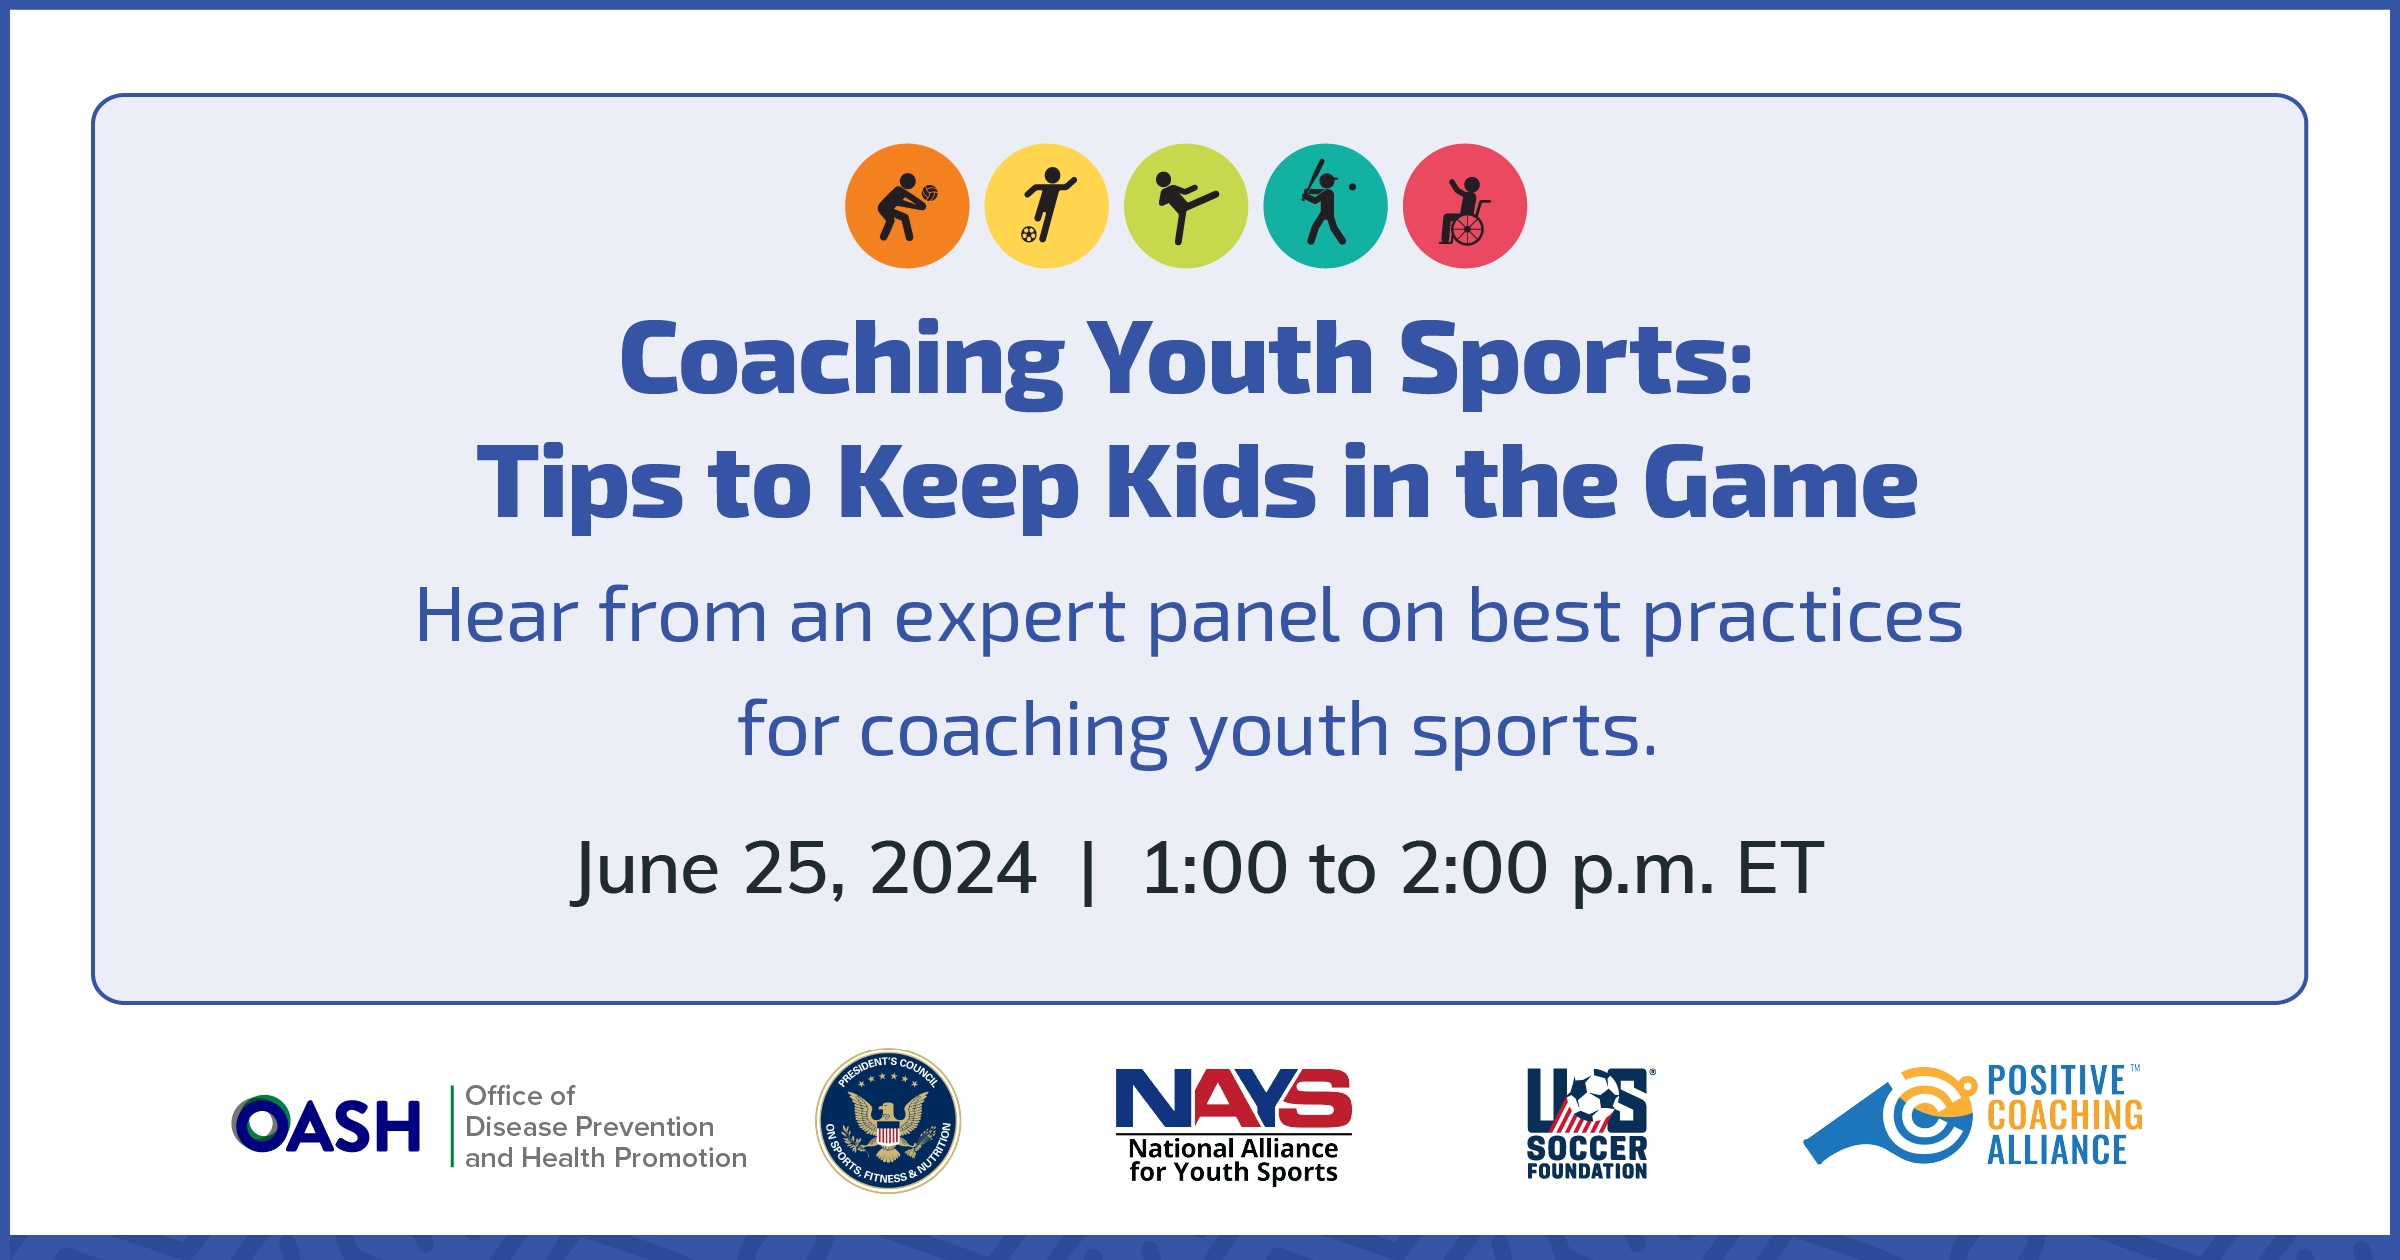 From top to bottom the text reads: Coaching Youth Sports: Tips to Keep Kids in the Game. Hear from an expert panel on best practices for coaching youth sports. June 25,2024. 1 to 2 p.m. ET.